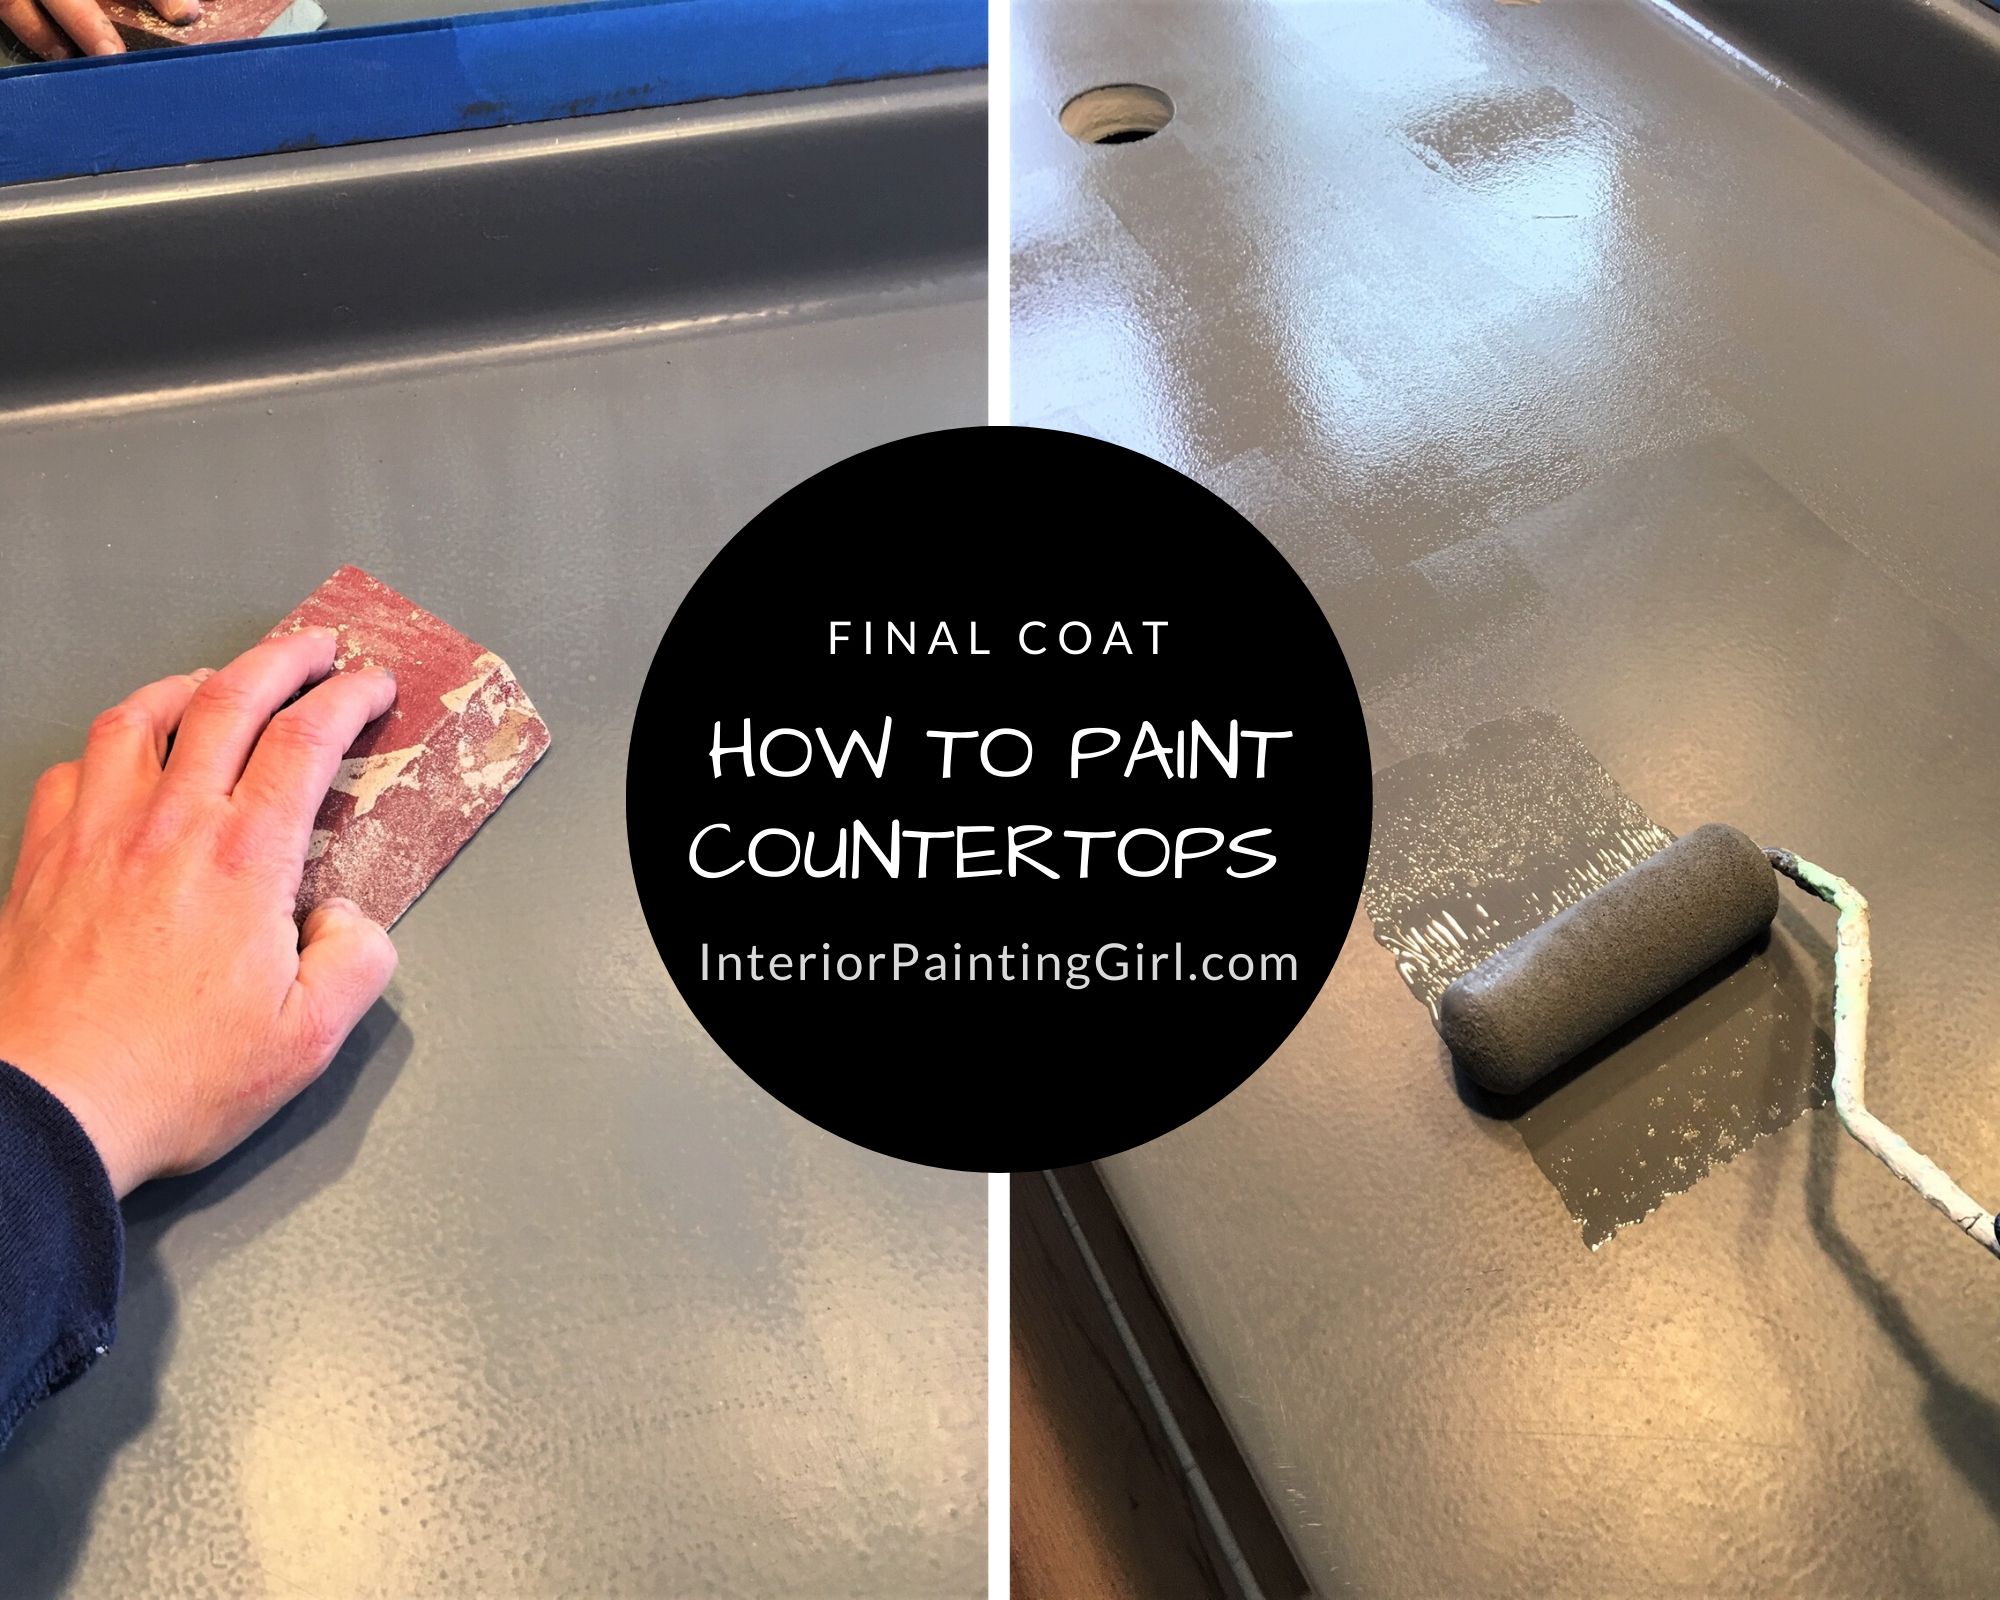 How To Paint Countertops - A Step-by-Step Guide from That Interior Painting Girl!